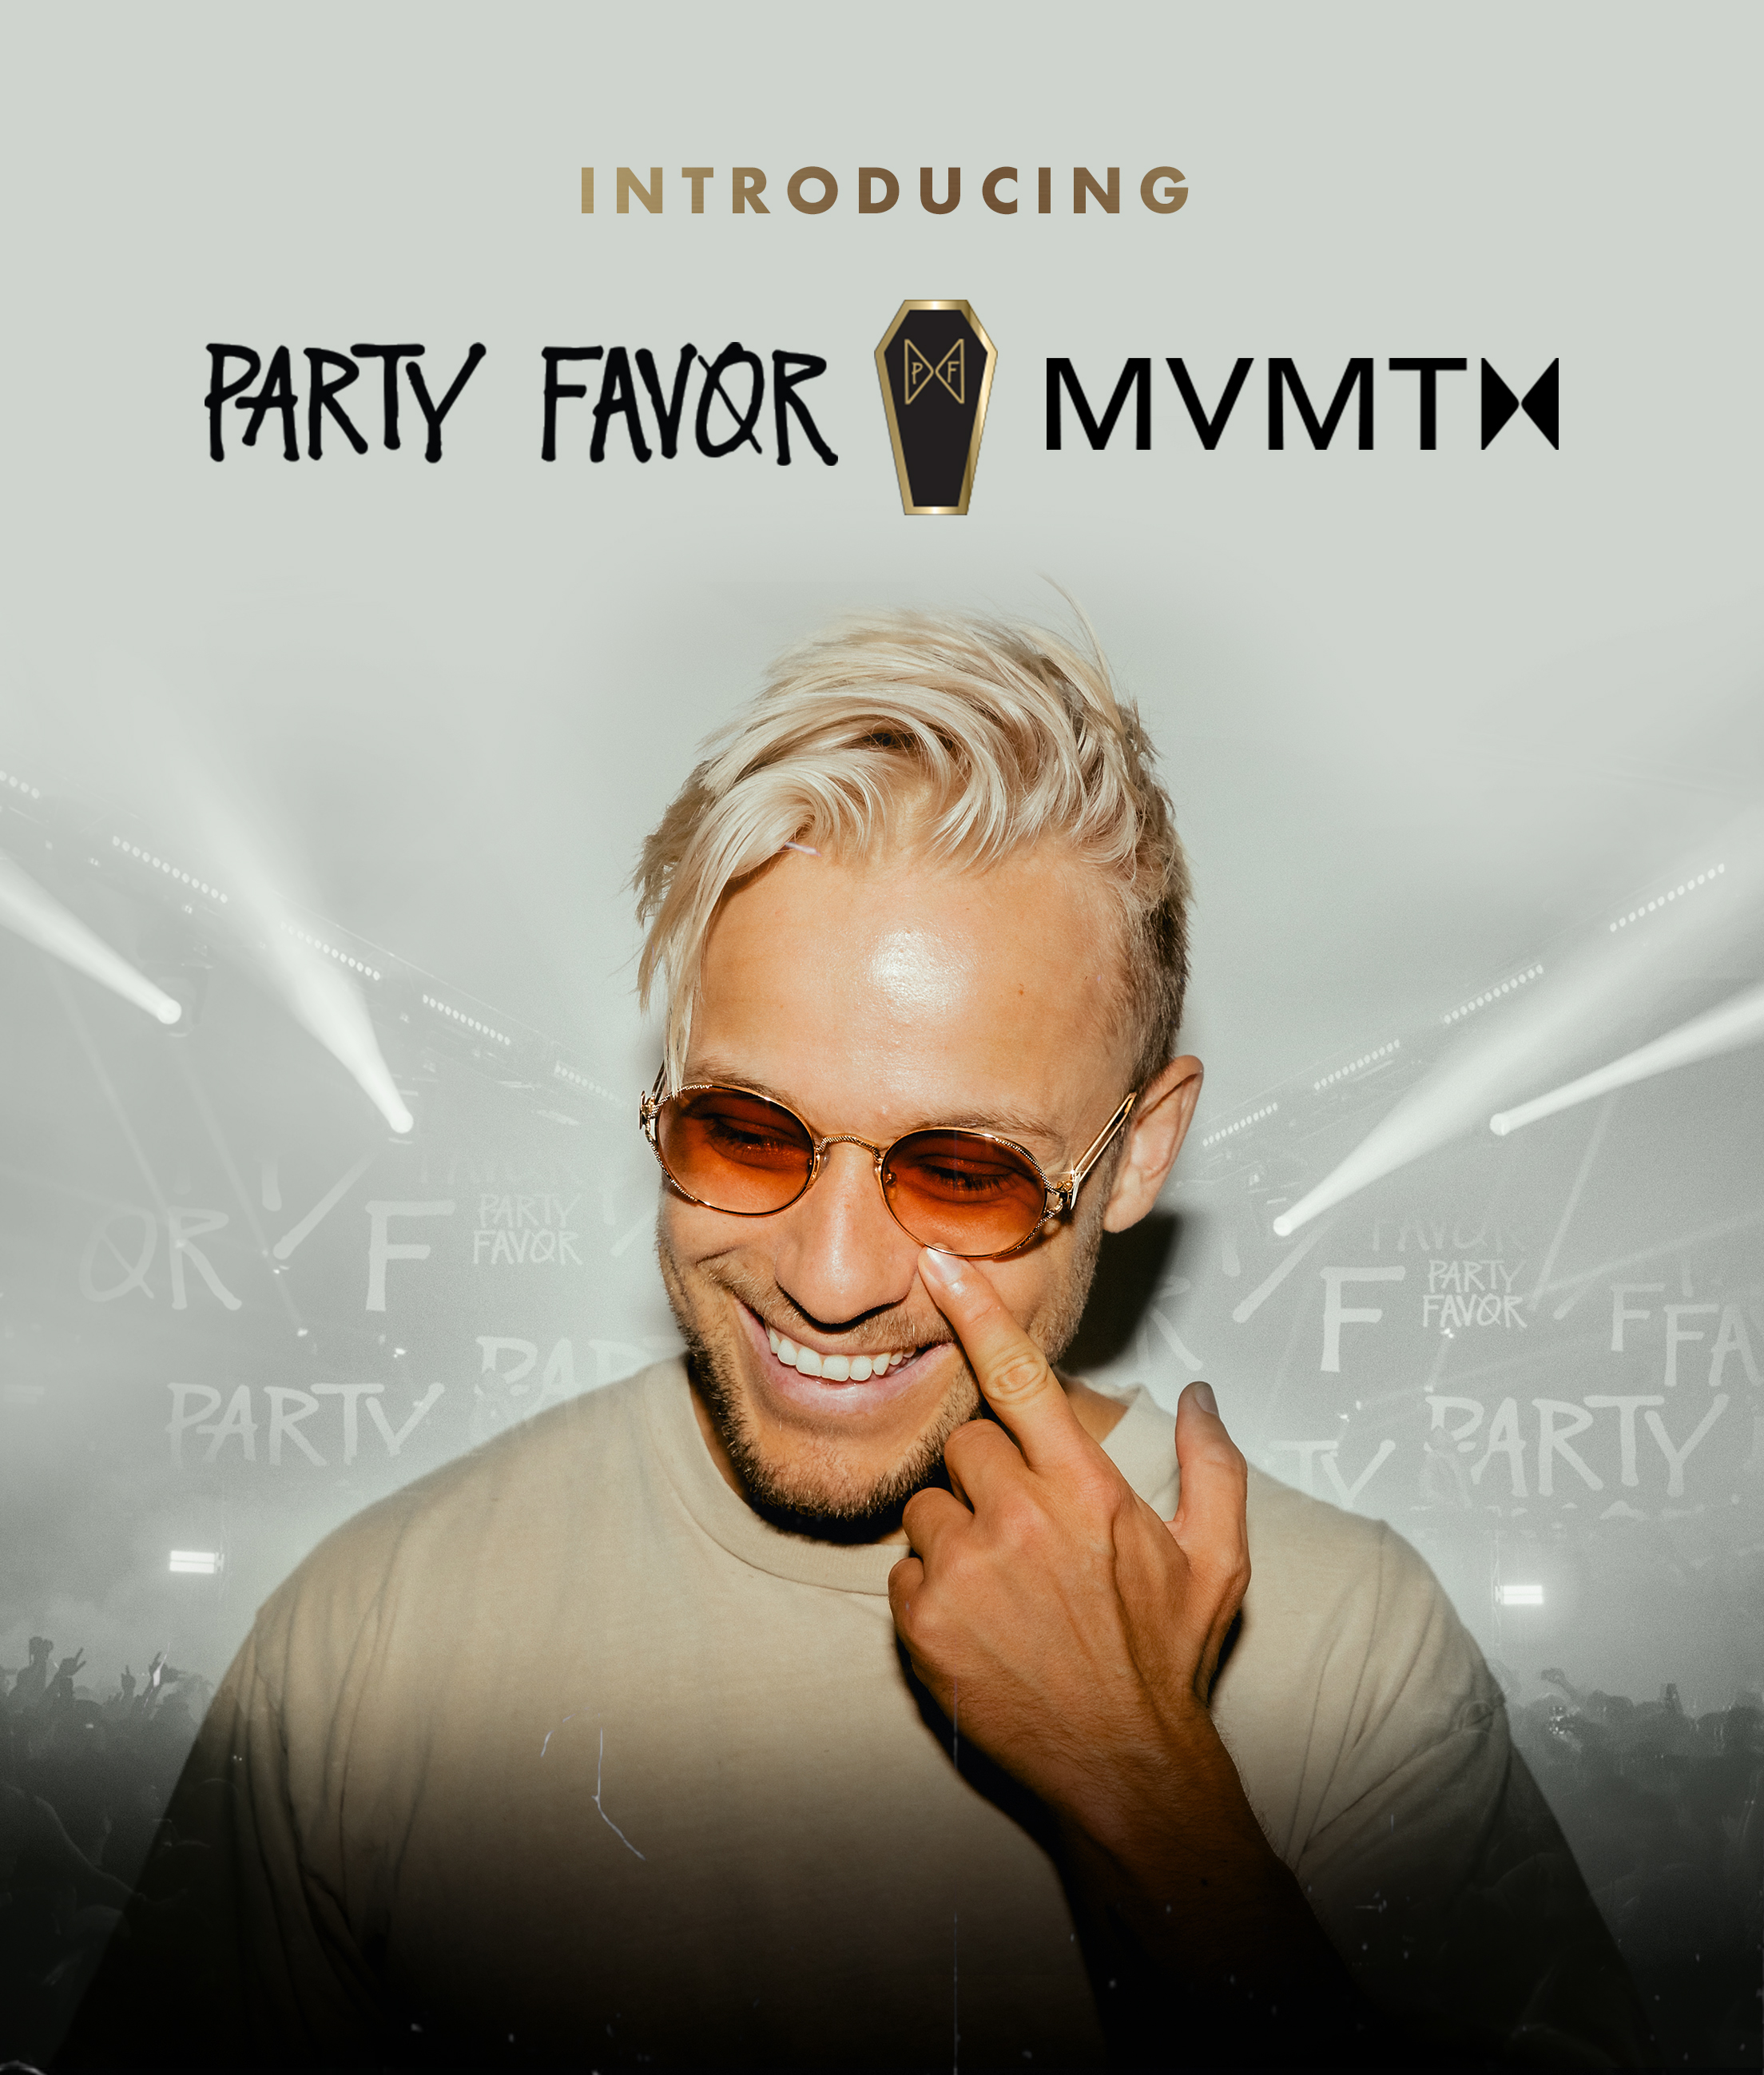 Introducing Party Favor x MVMT